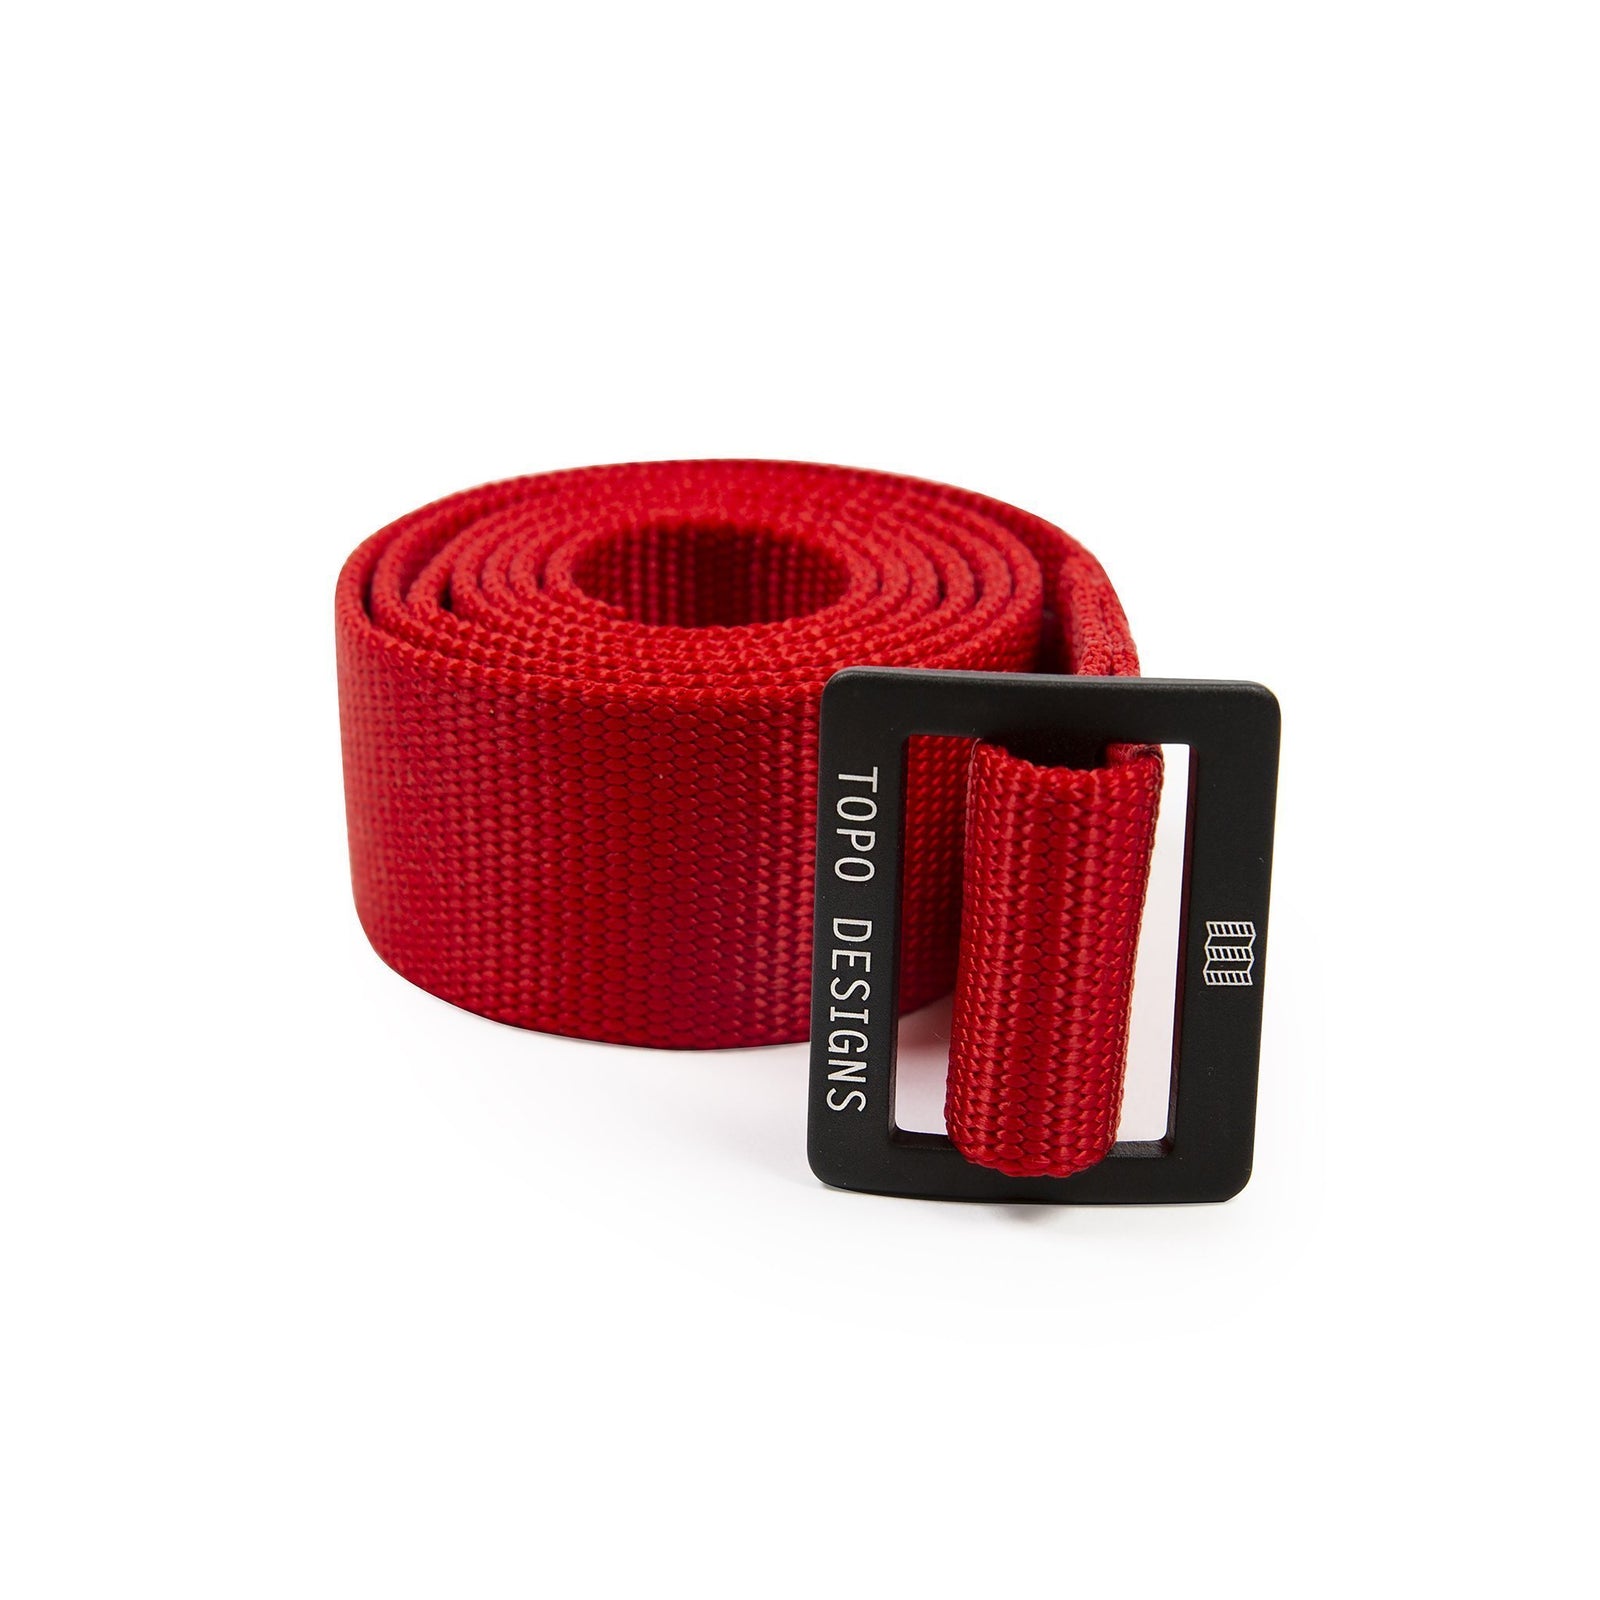 Topo Designs web belt in "red" with black buckle